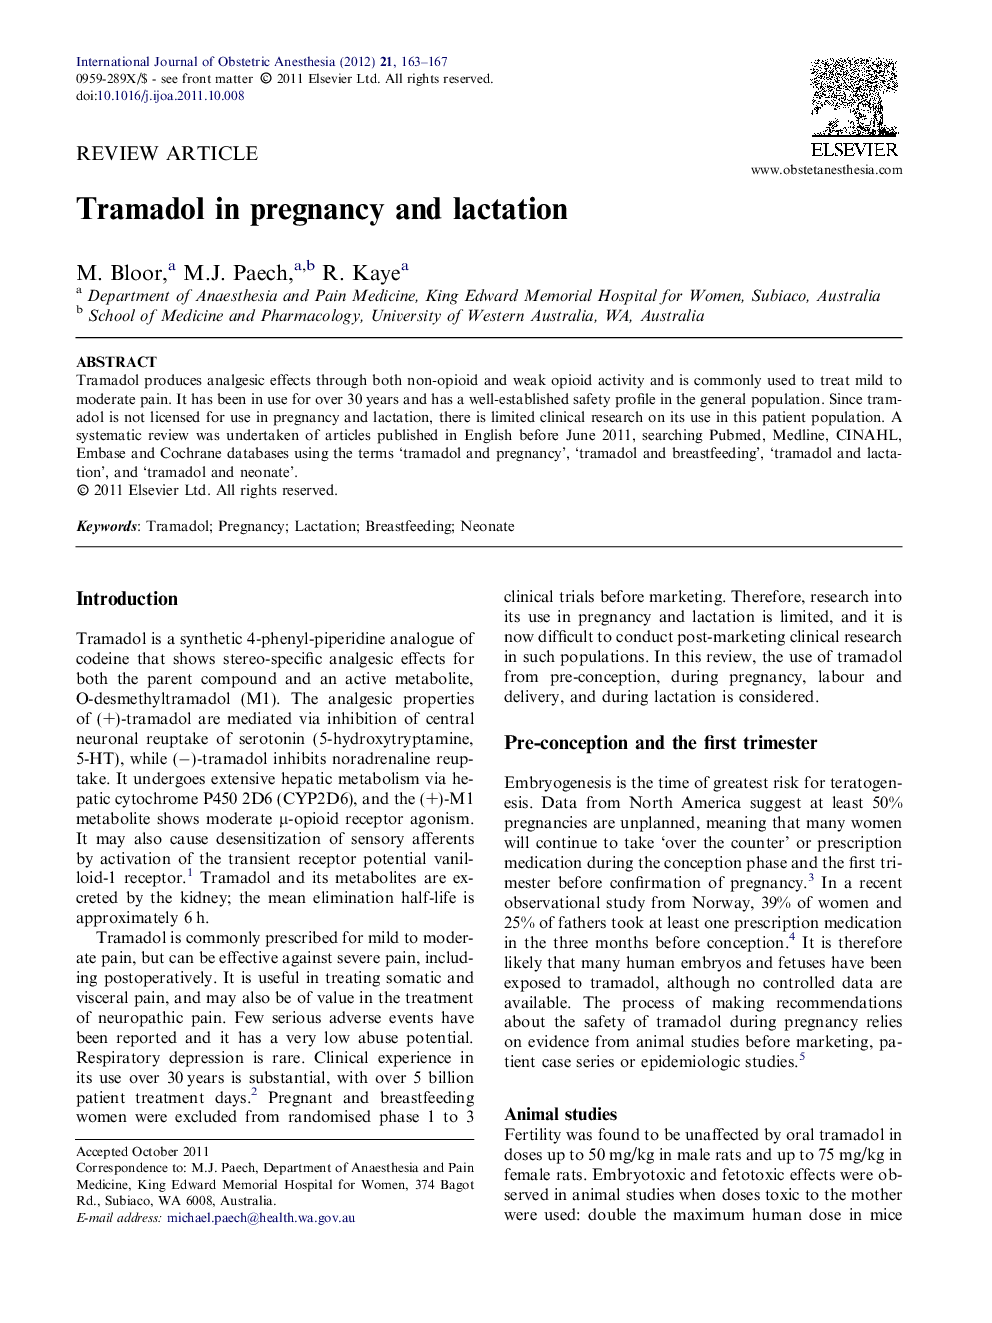 Tramadol in pregnancy and lactation